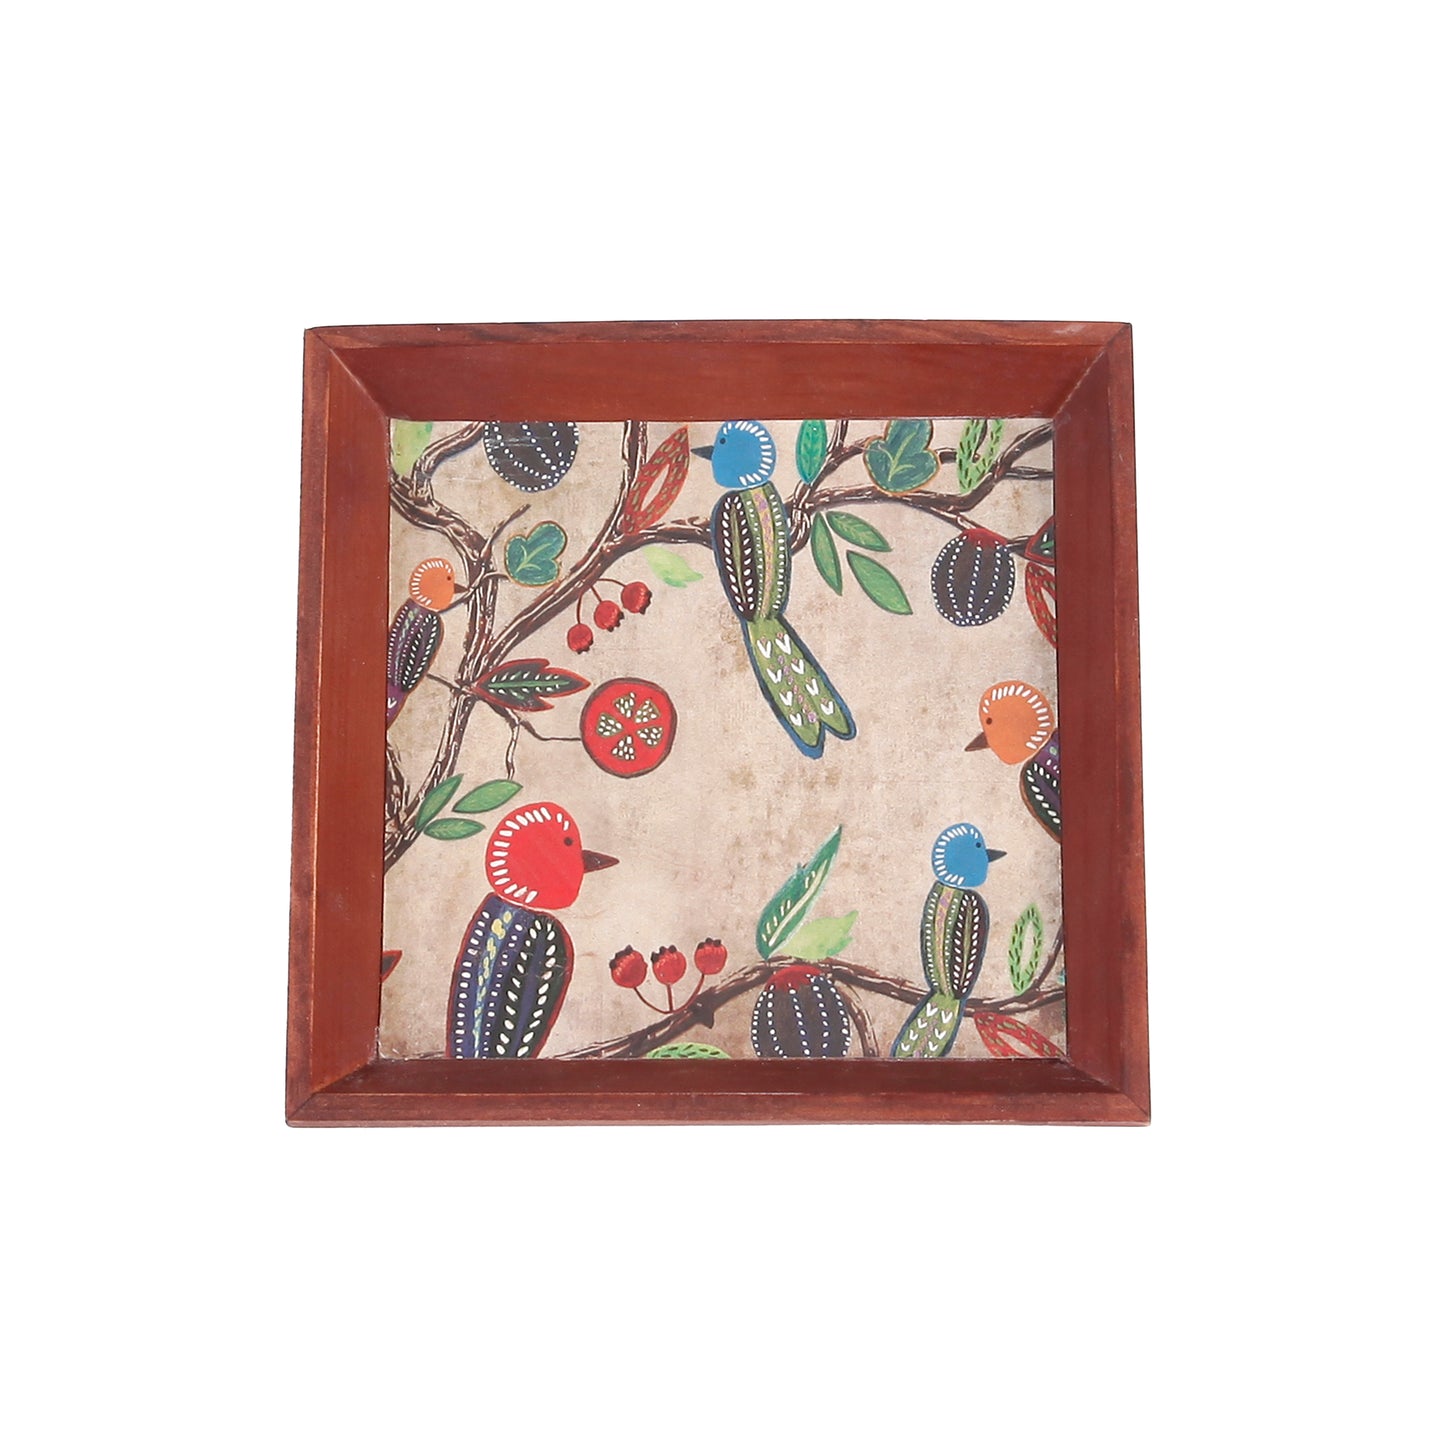 A Tiny Mistake Vintage Birds Small Square Wooden Serving Tray, 18 x 18 x 2 cm